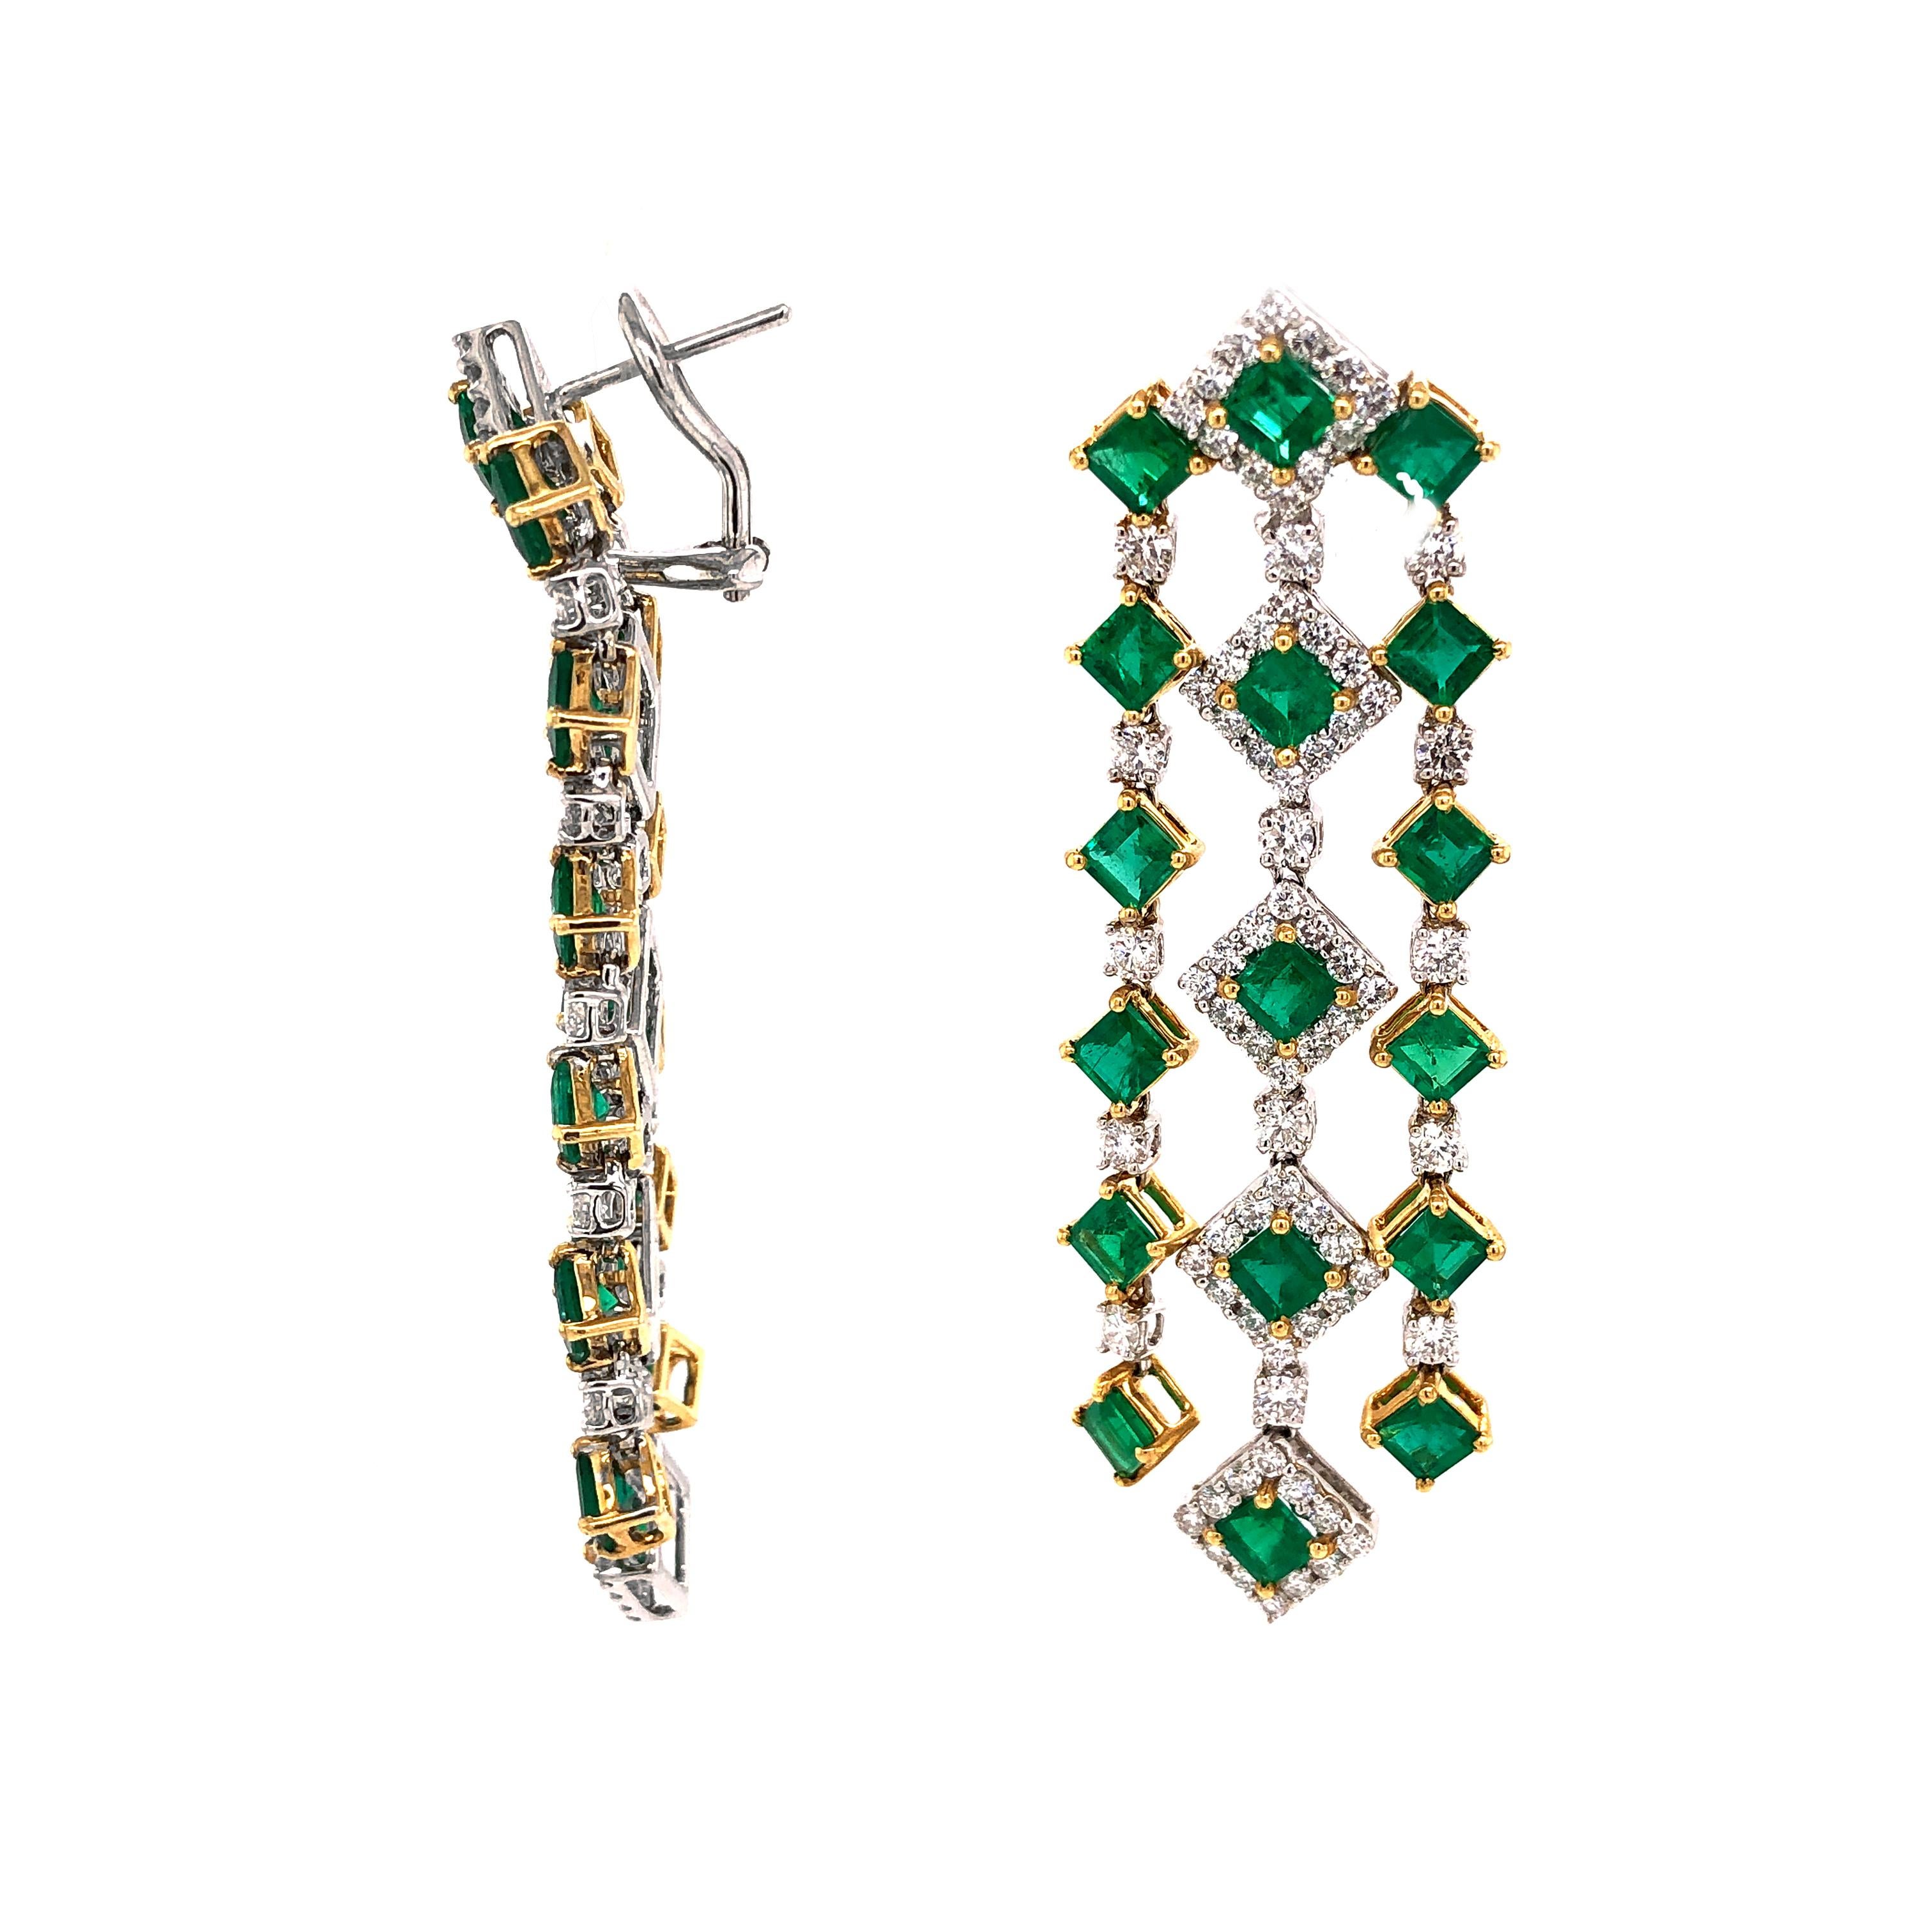 Zambian Square Cut Emerald 11.09 Carat Diamond 18 Karat Gold Chandelier Earrings In New Condition For Sale In New York, NY